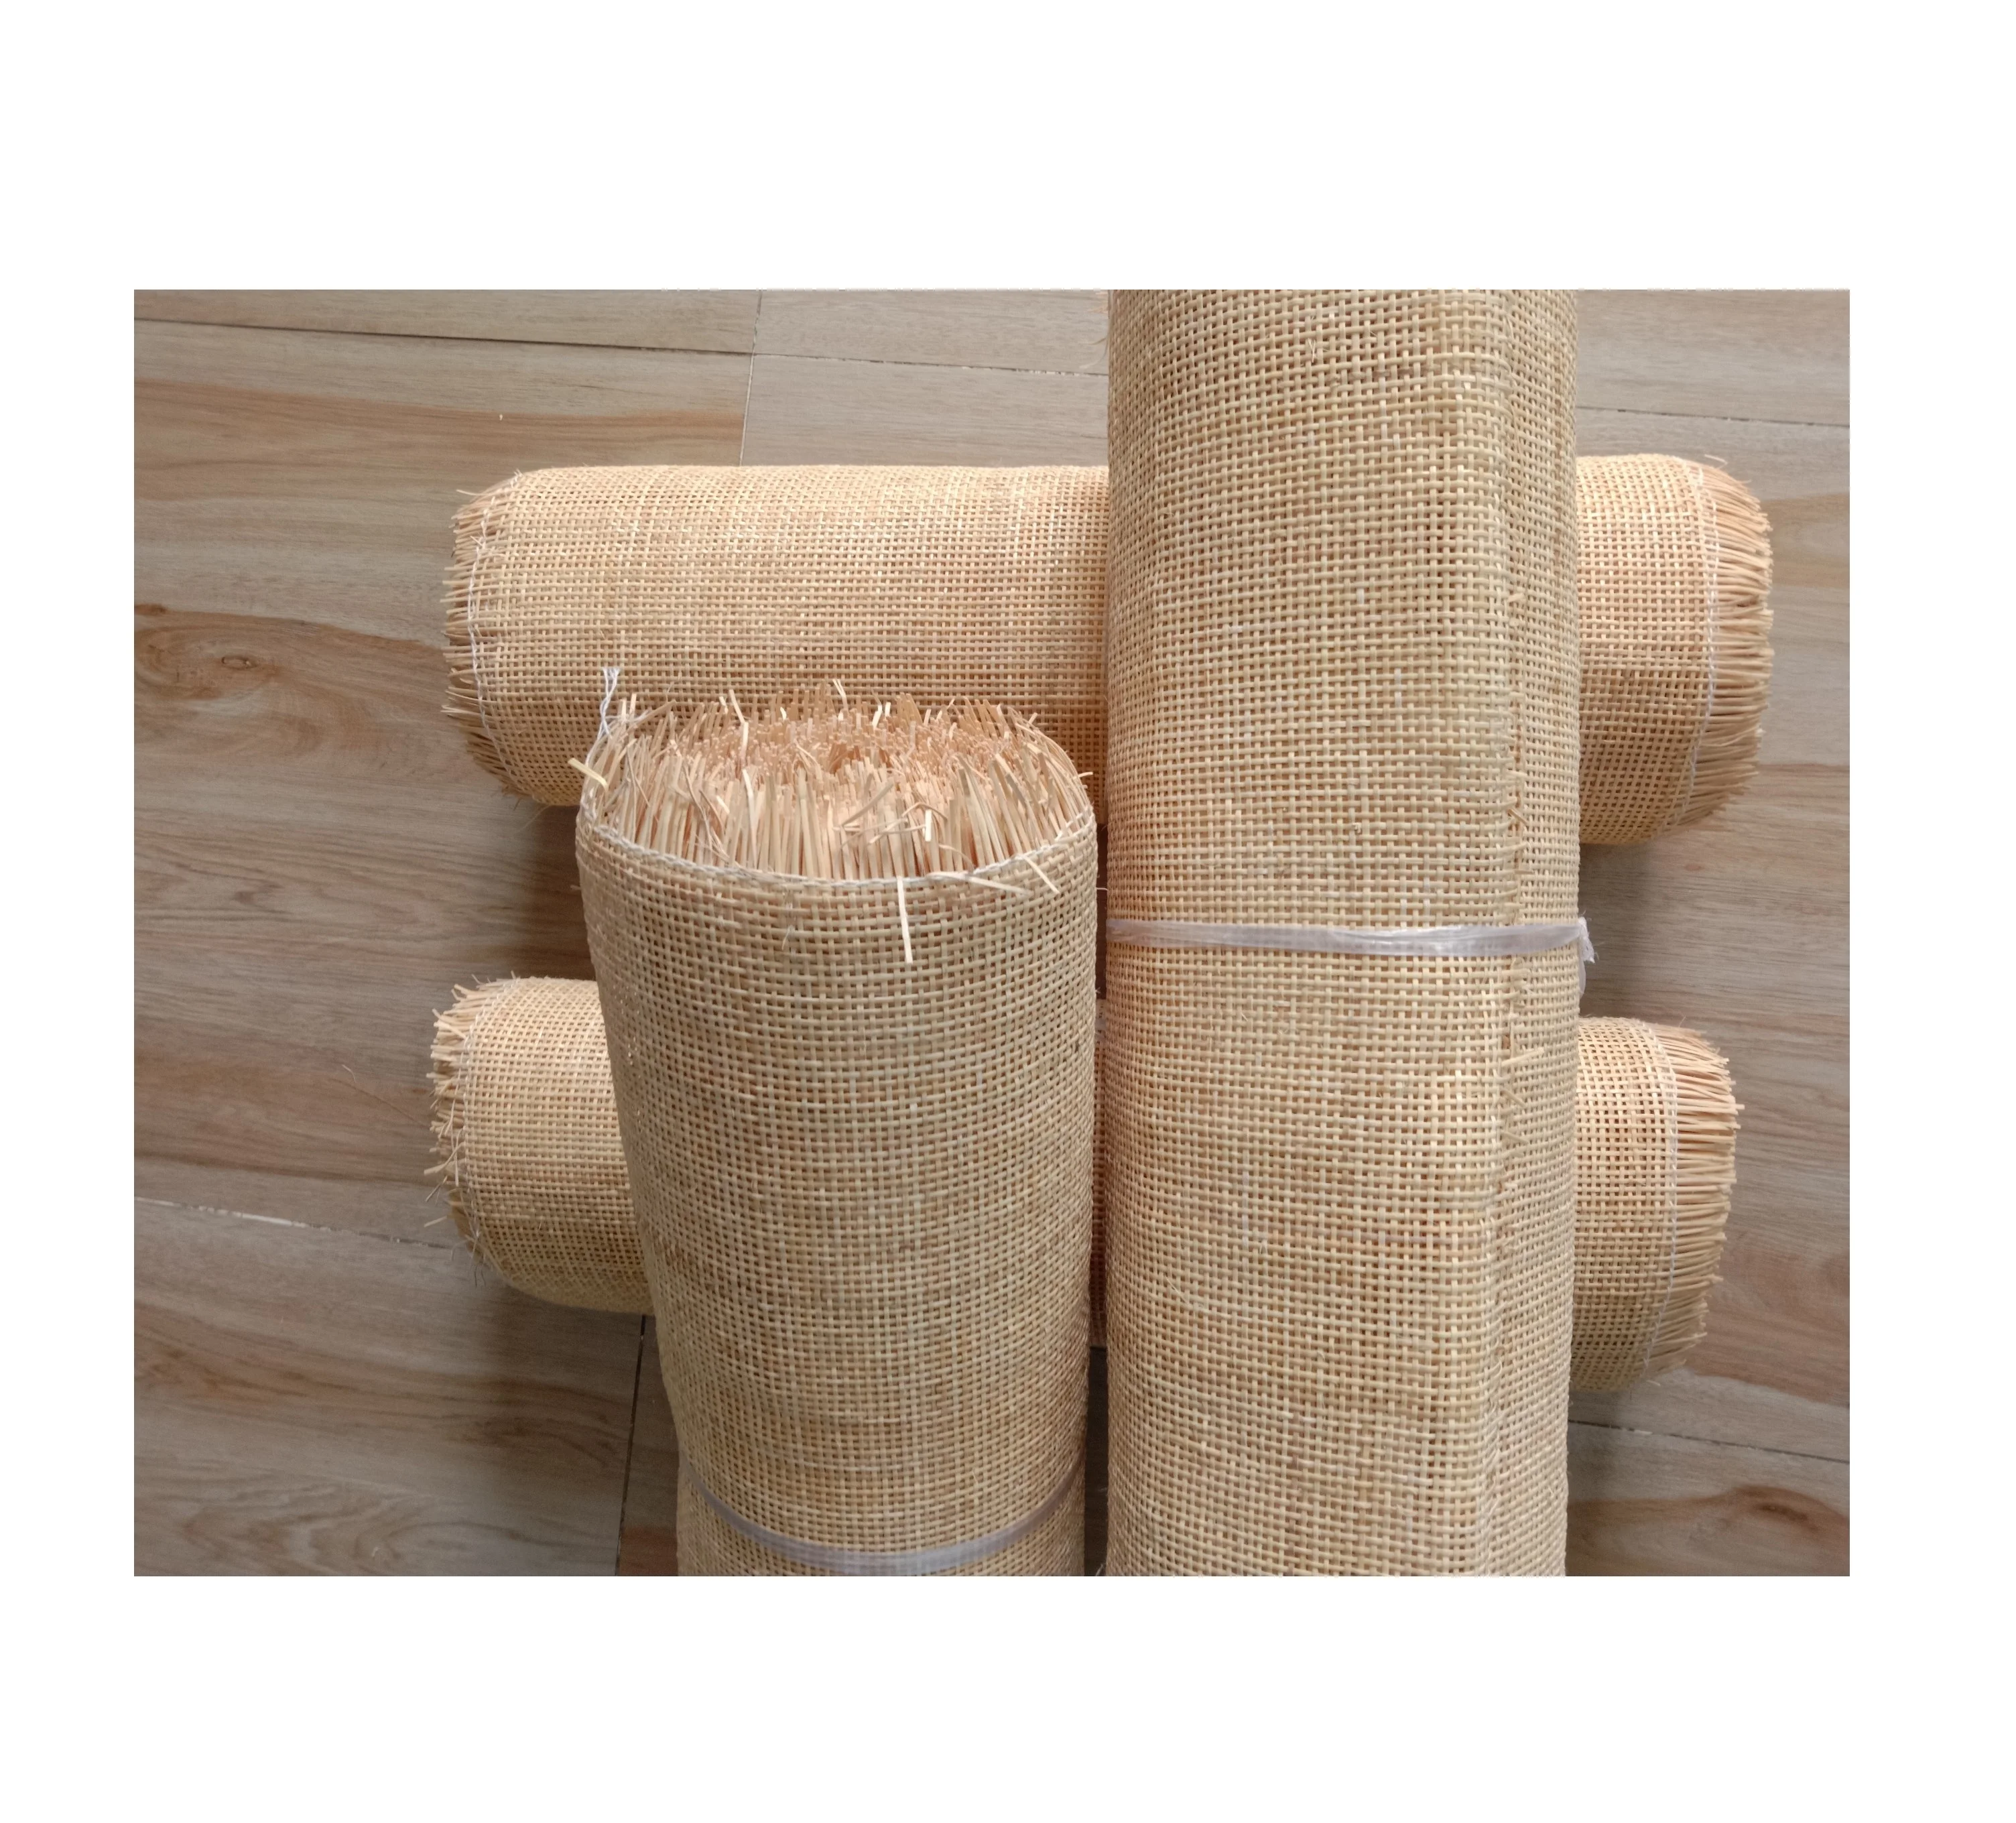 
Woven Rattan Sheet - Premium Radio Cane Webbing - Webbing Rattan Roll From Vietnam High Quality Competitive Price For Export 